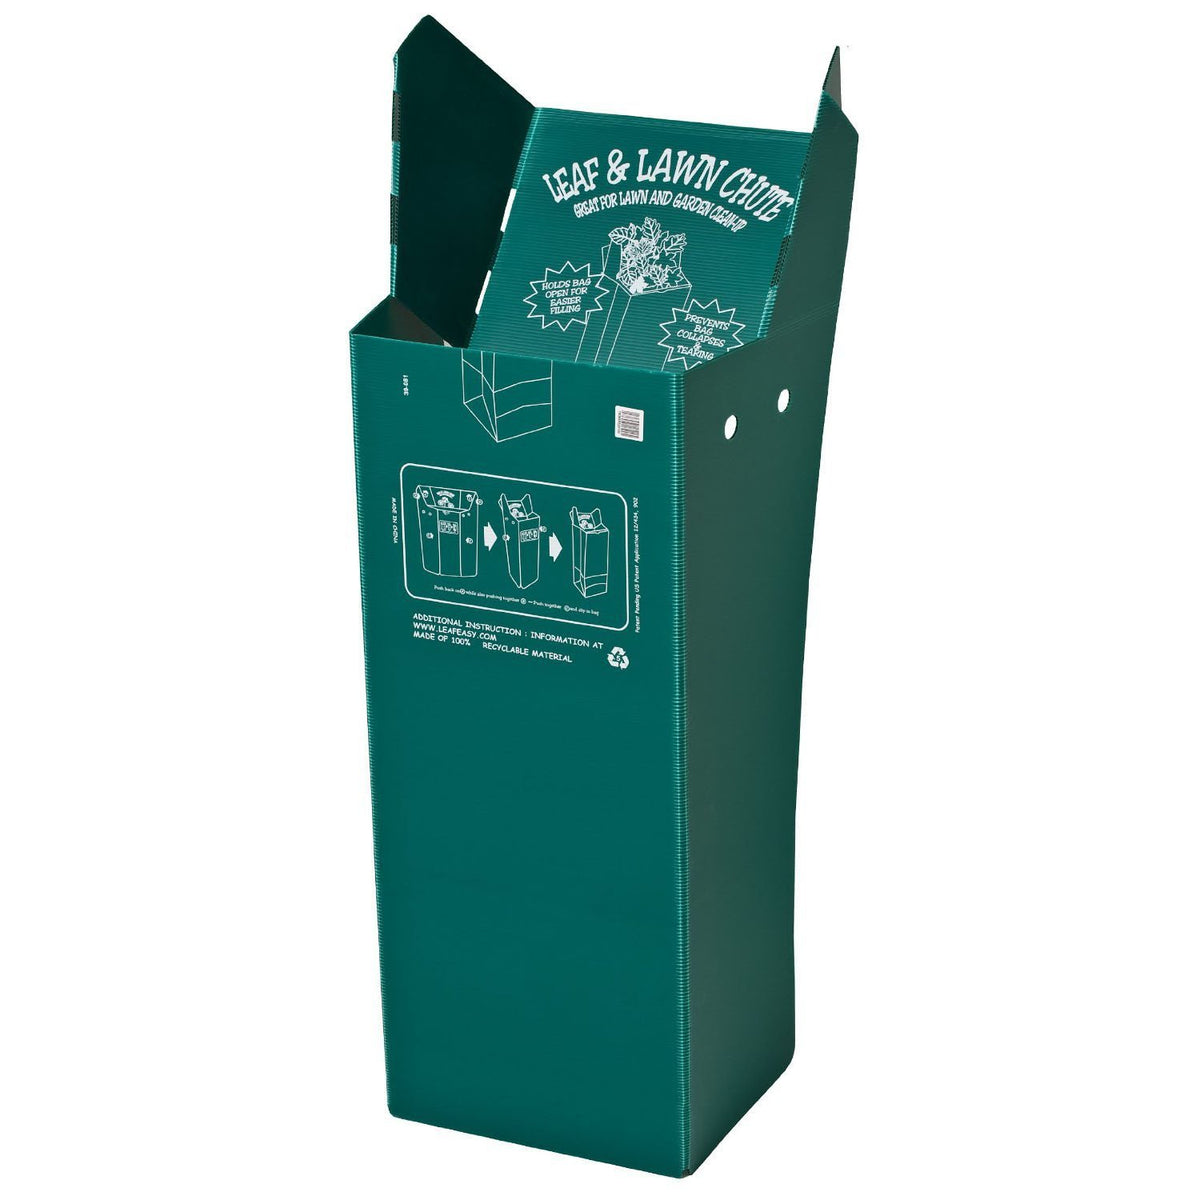 Buy luster leaf lawn chute - Online store for lawn & garden tools, lawn & leaf bags in USA, on sale, low price, discount deals, coupon code